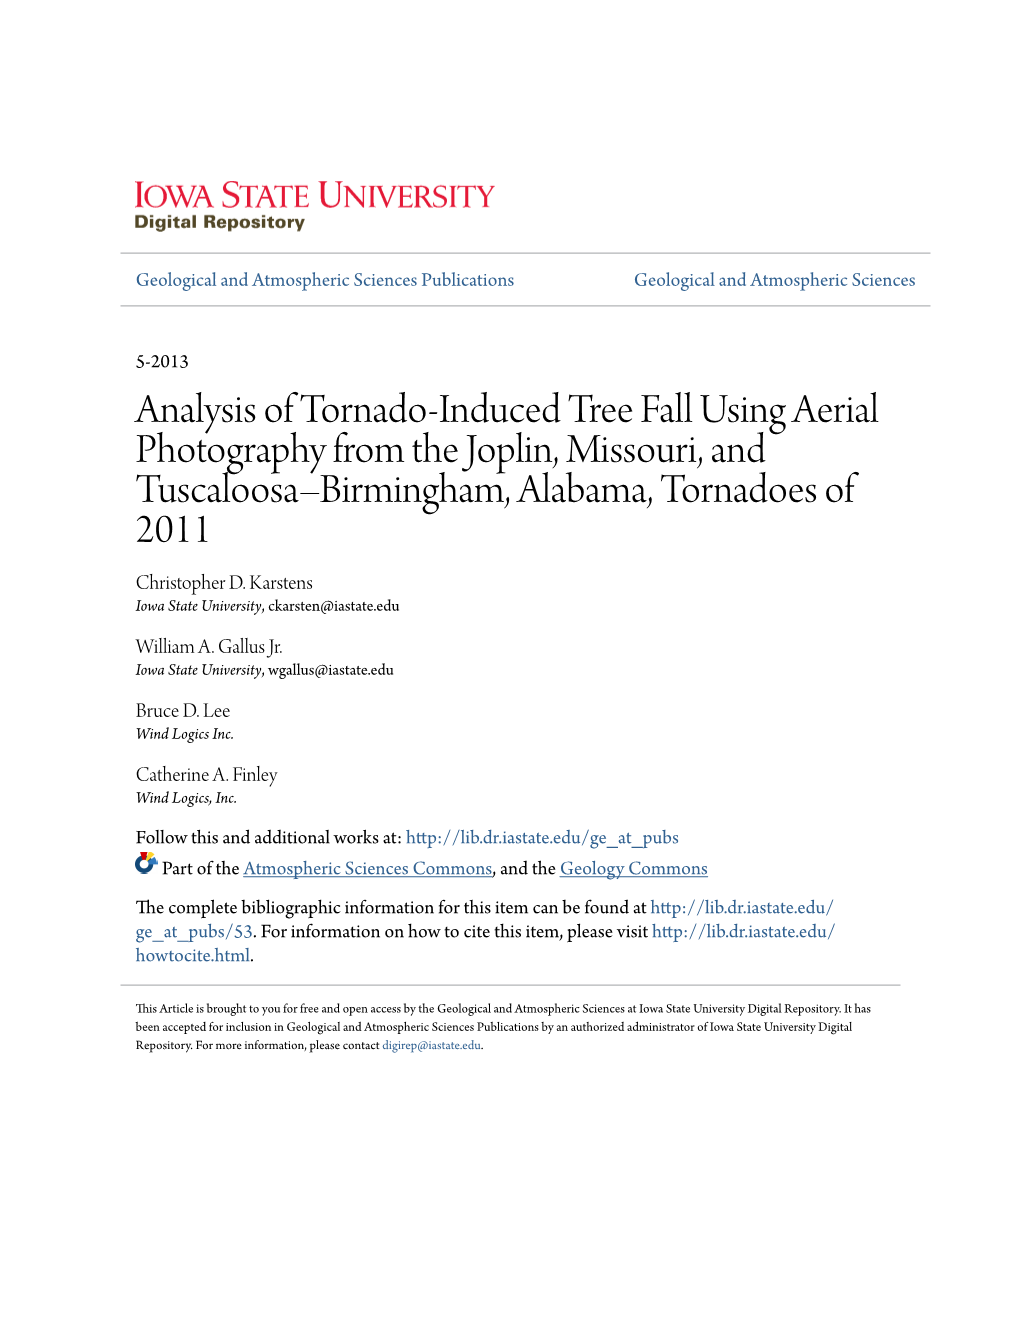 Analysis of Tornado-Induced Tree Fall Using Aerial Photography from the Joplin, Missouri, and Tuscaloosa–Birmingham, Alabama, Tornadoes of 2011 Christopher D